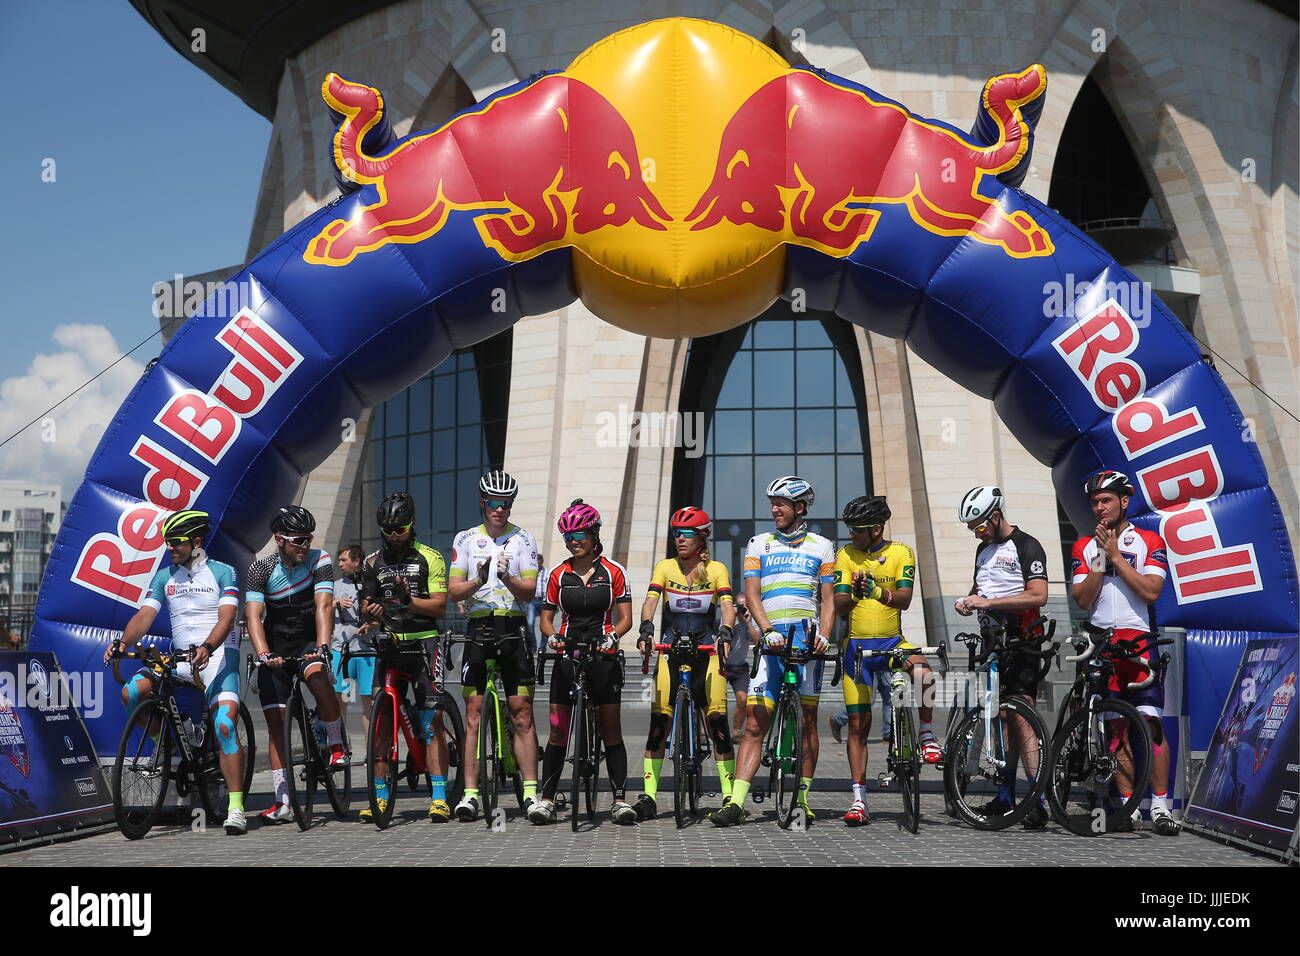 Kazan, Russia. 20th July, 2017. Participants in a leg of the 2017 Red Bull  Trans-Siberian Extreme ultra-stage bicycle race. Credit: Yegor  Aleyev/TASS/Alamy Live News Stock Photo - Alamy